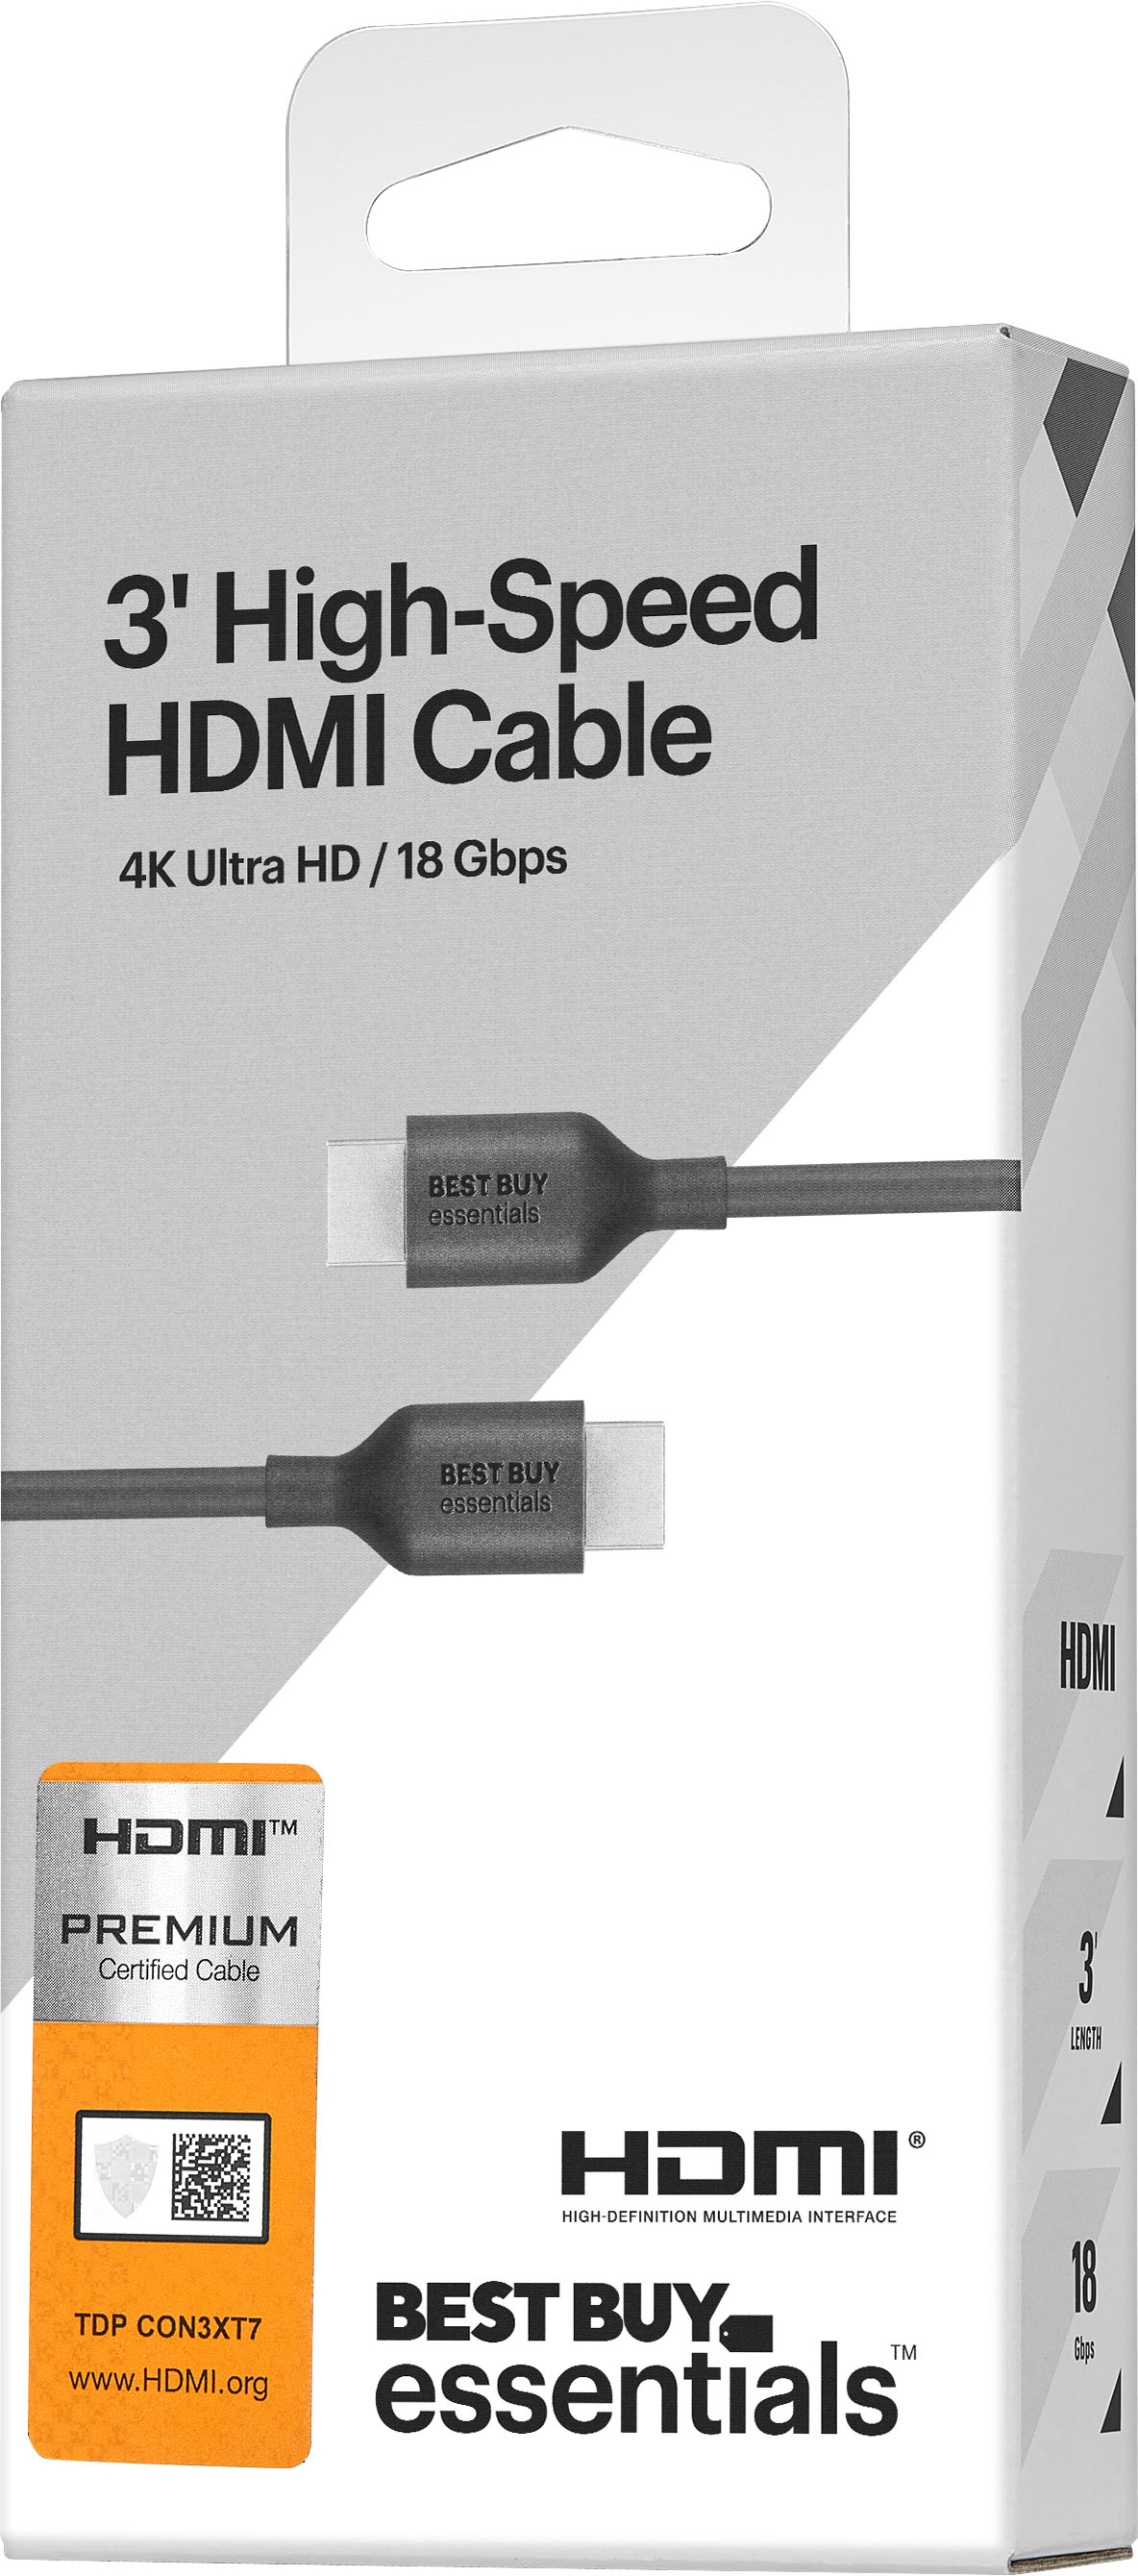 Hdmi Cables For Macbook Pro - Best Buy